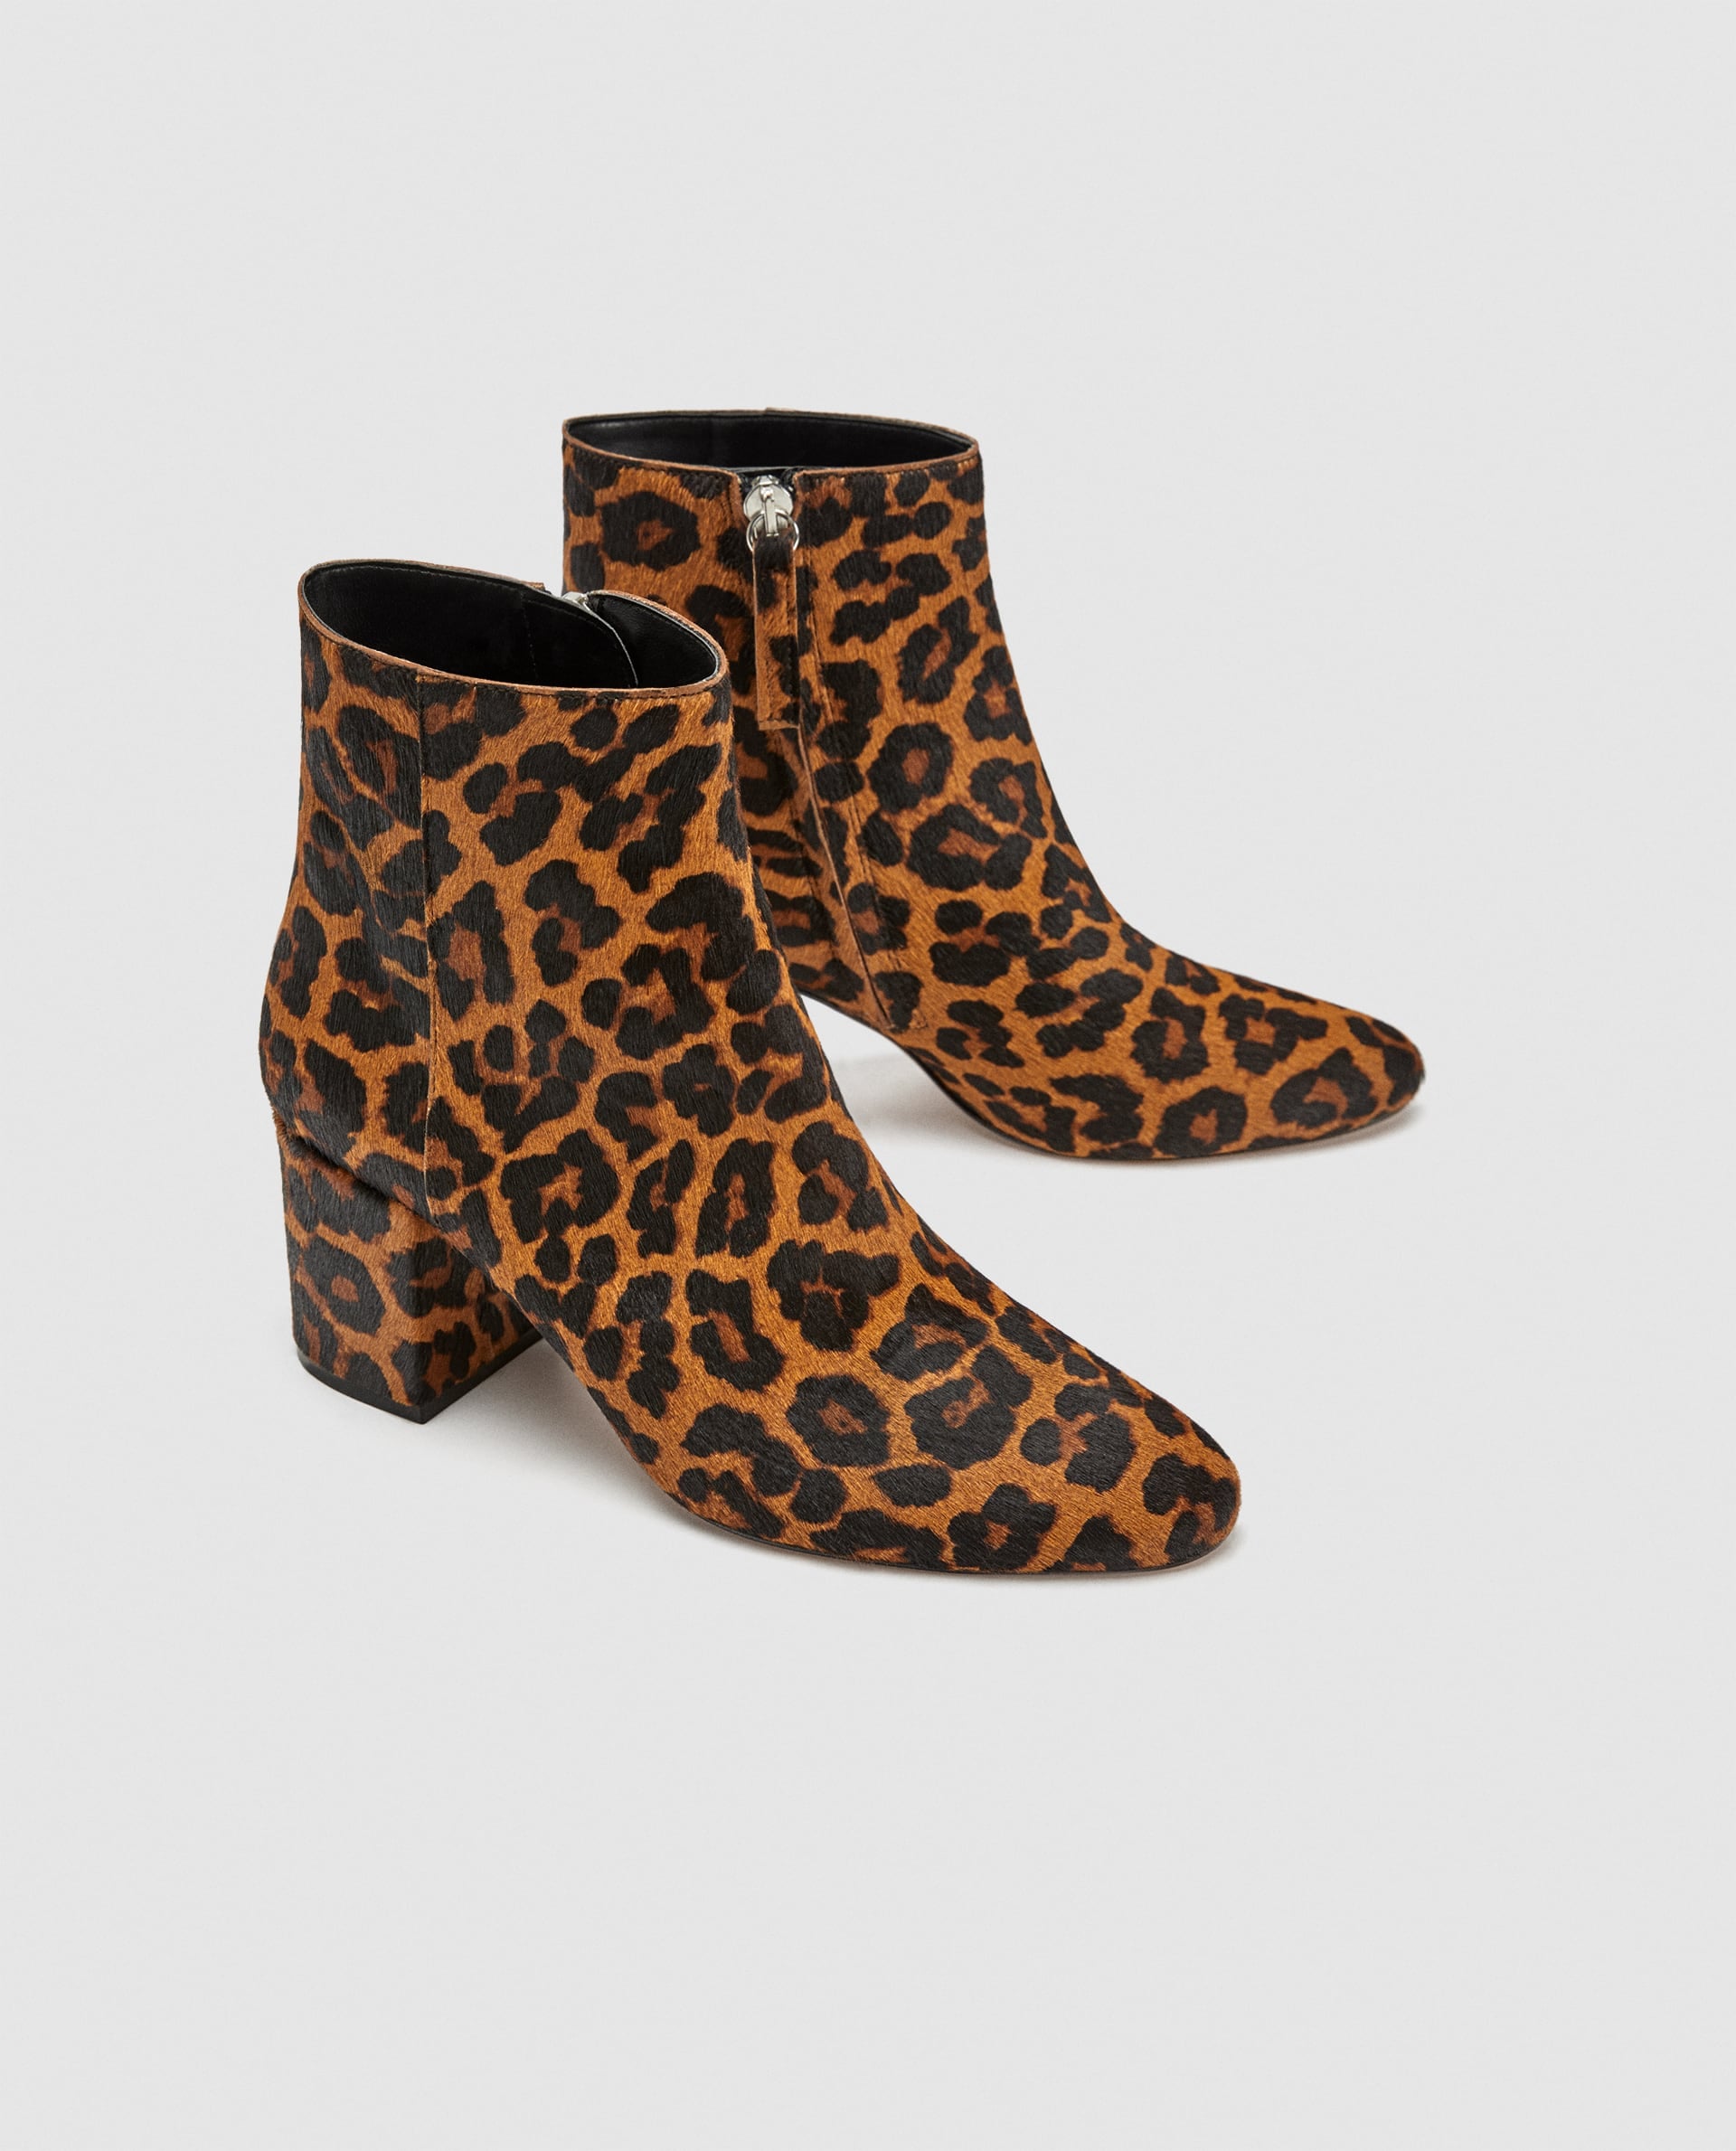 Zara Animal Print Ankle Boots | Gwen Stefani's Boots Are So 